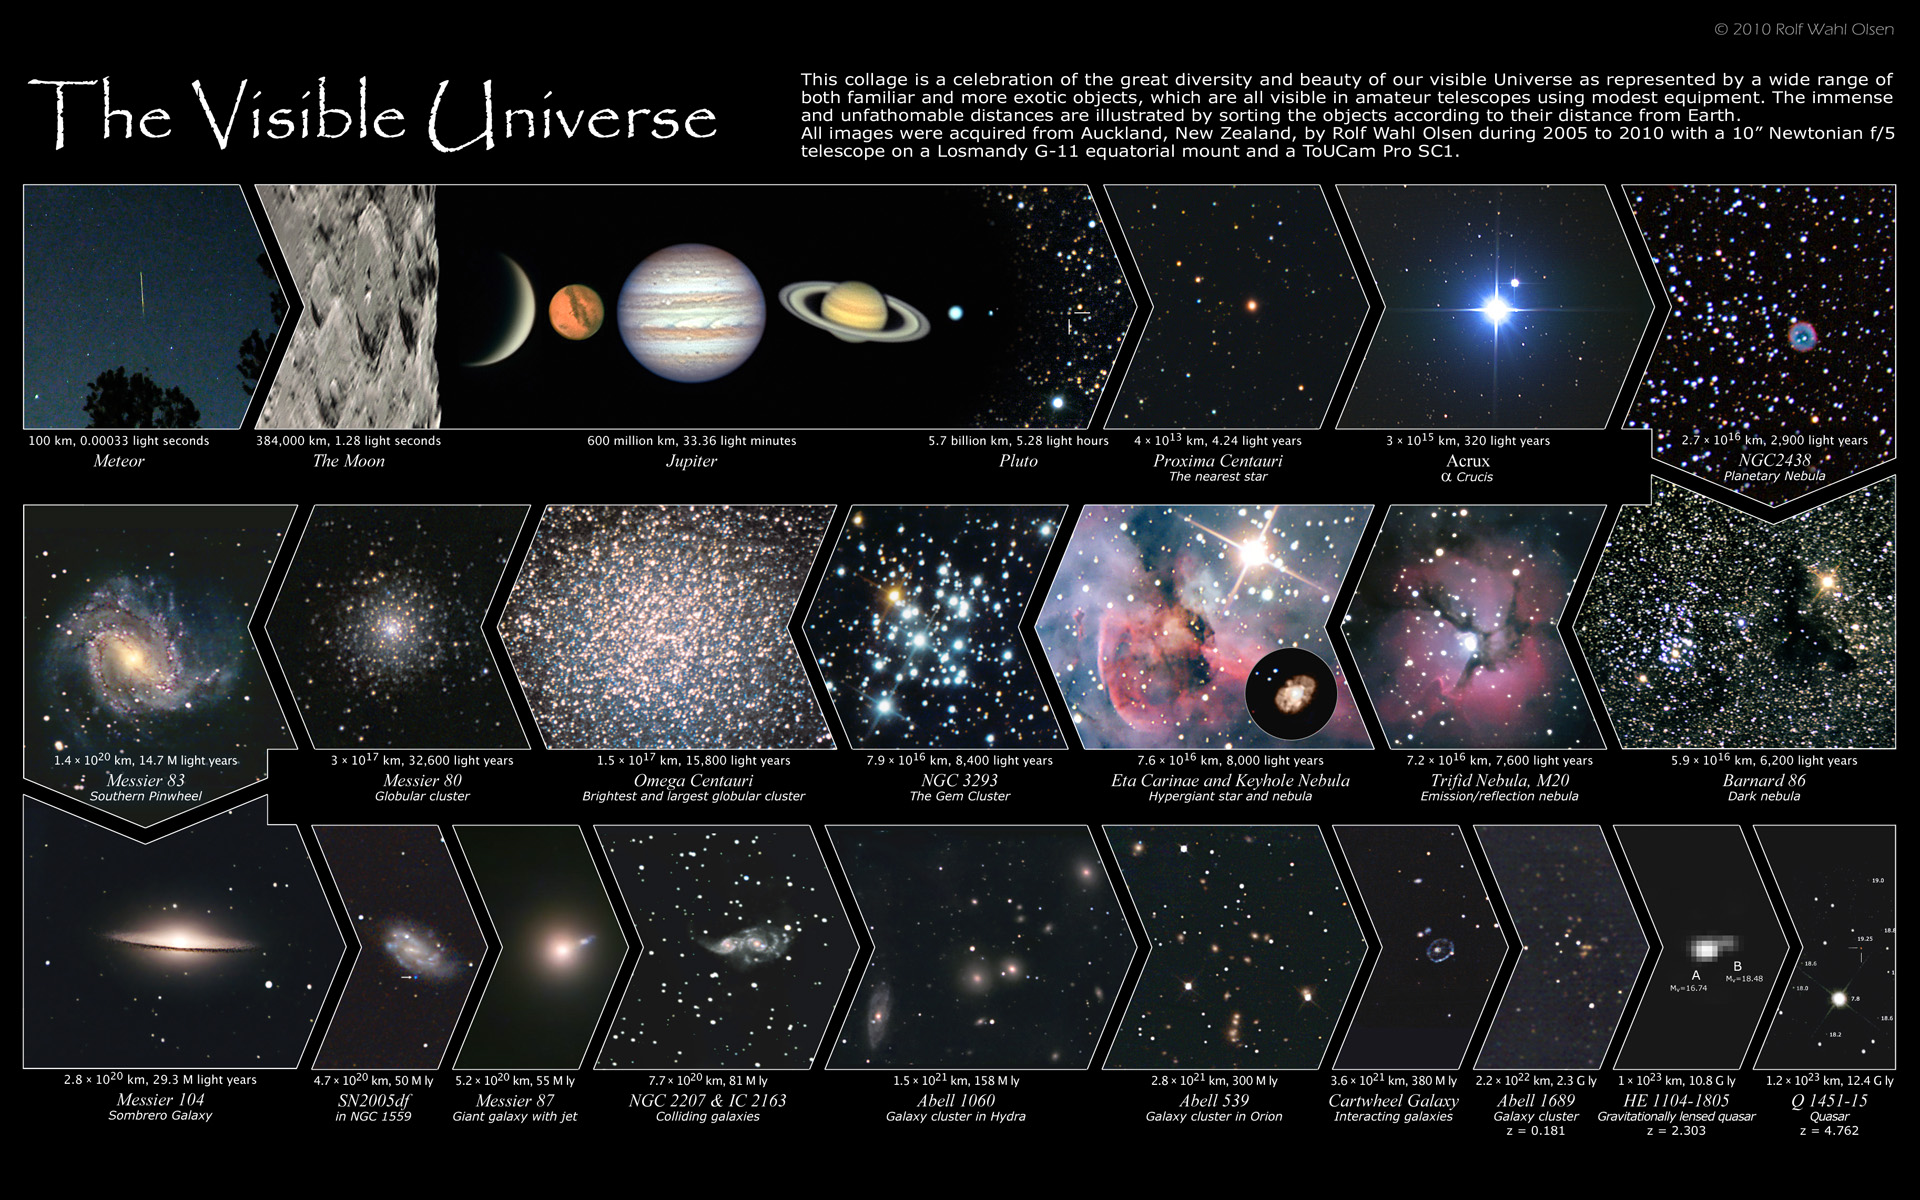 The Visible Universe - a journey from 100 km to 12.4 billion light years